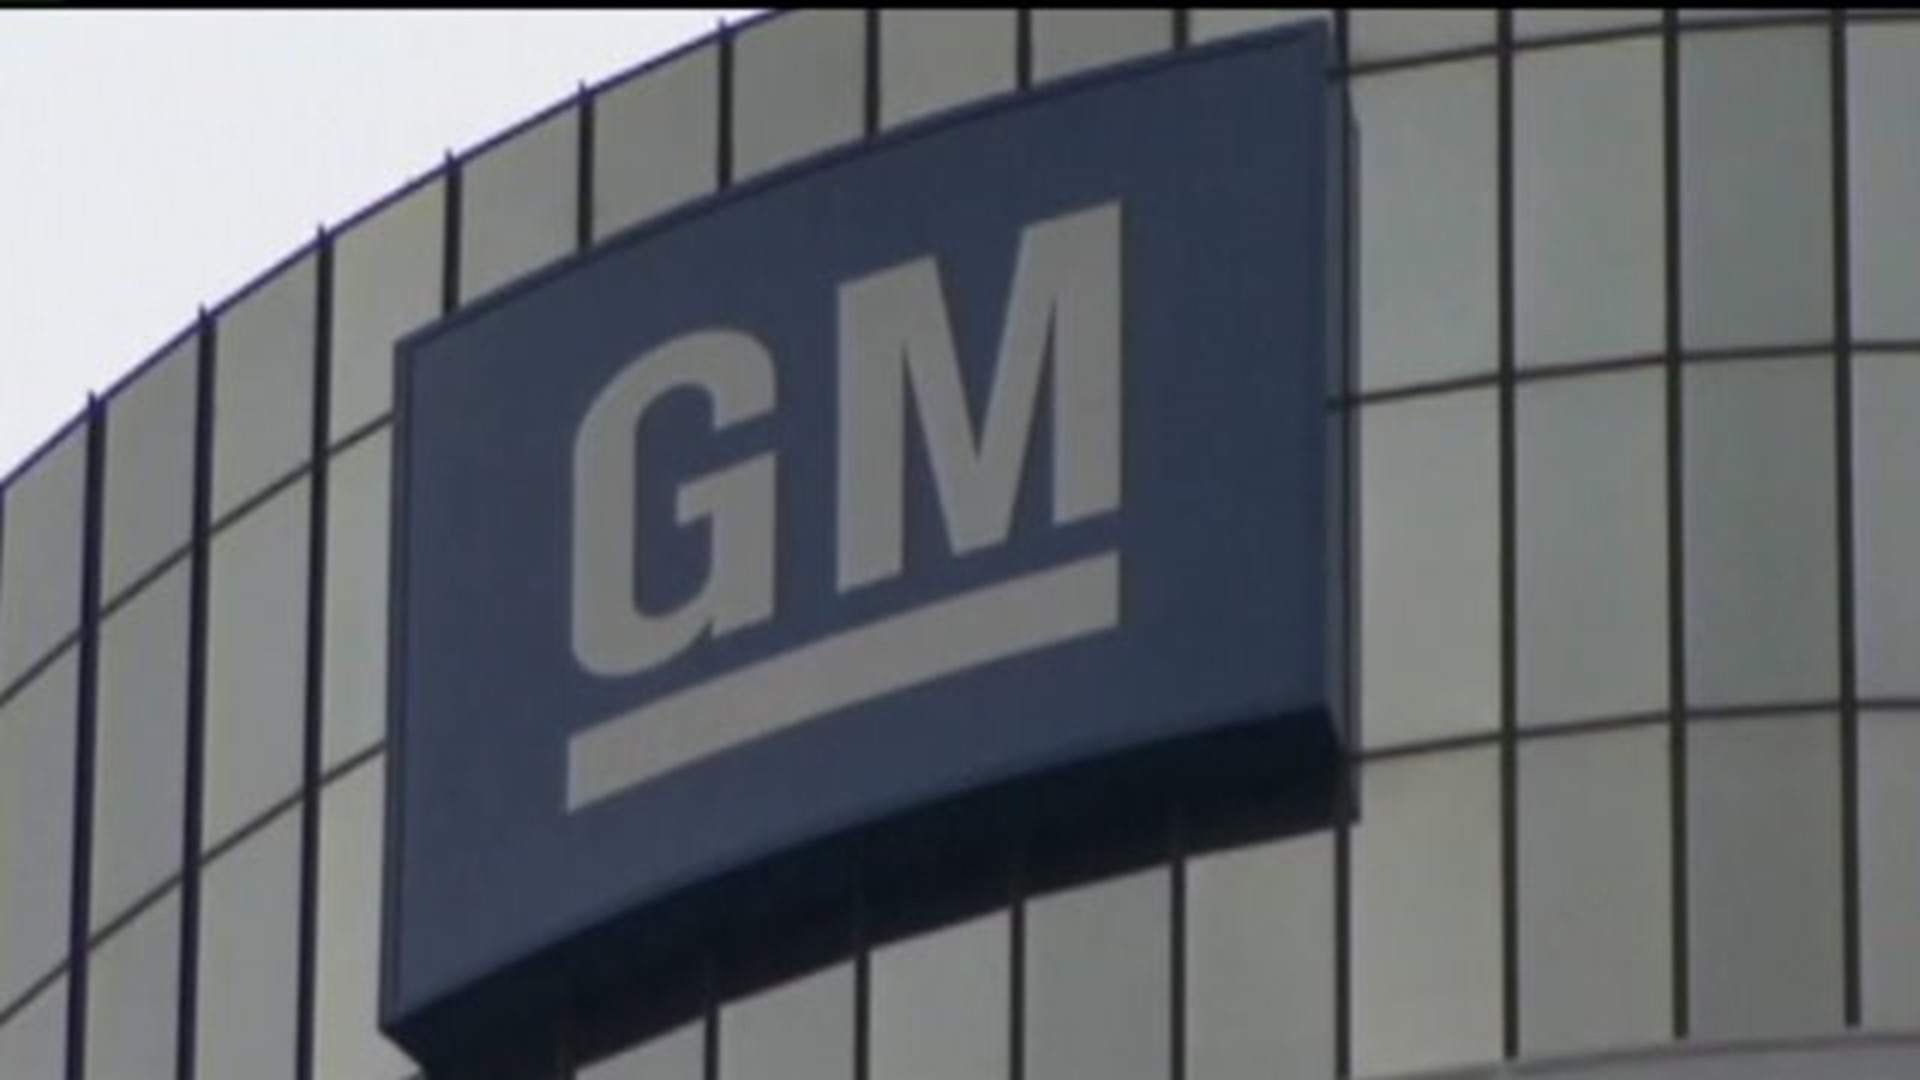 GM issues recall for wiring issues